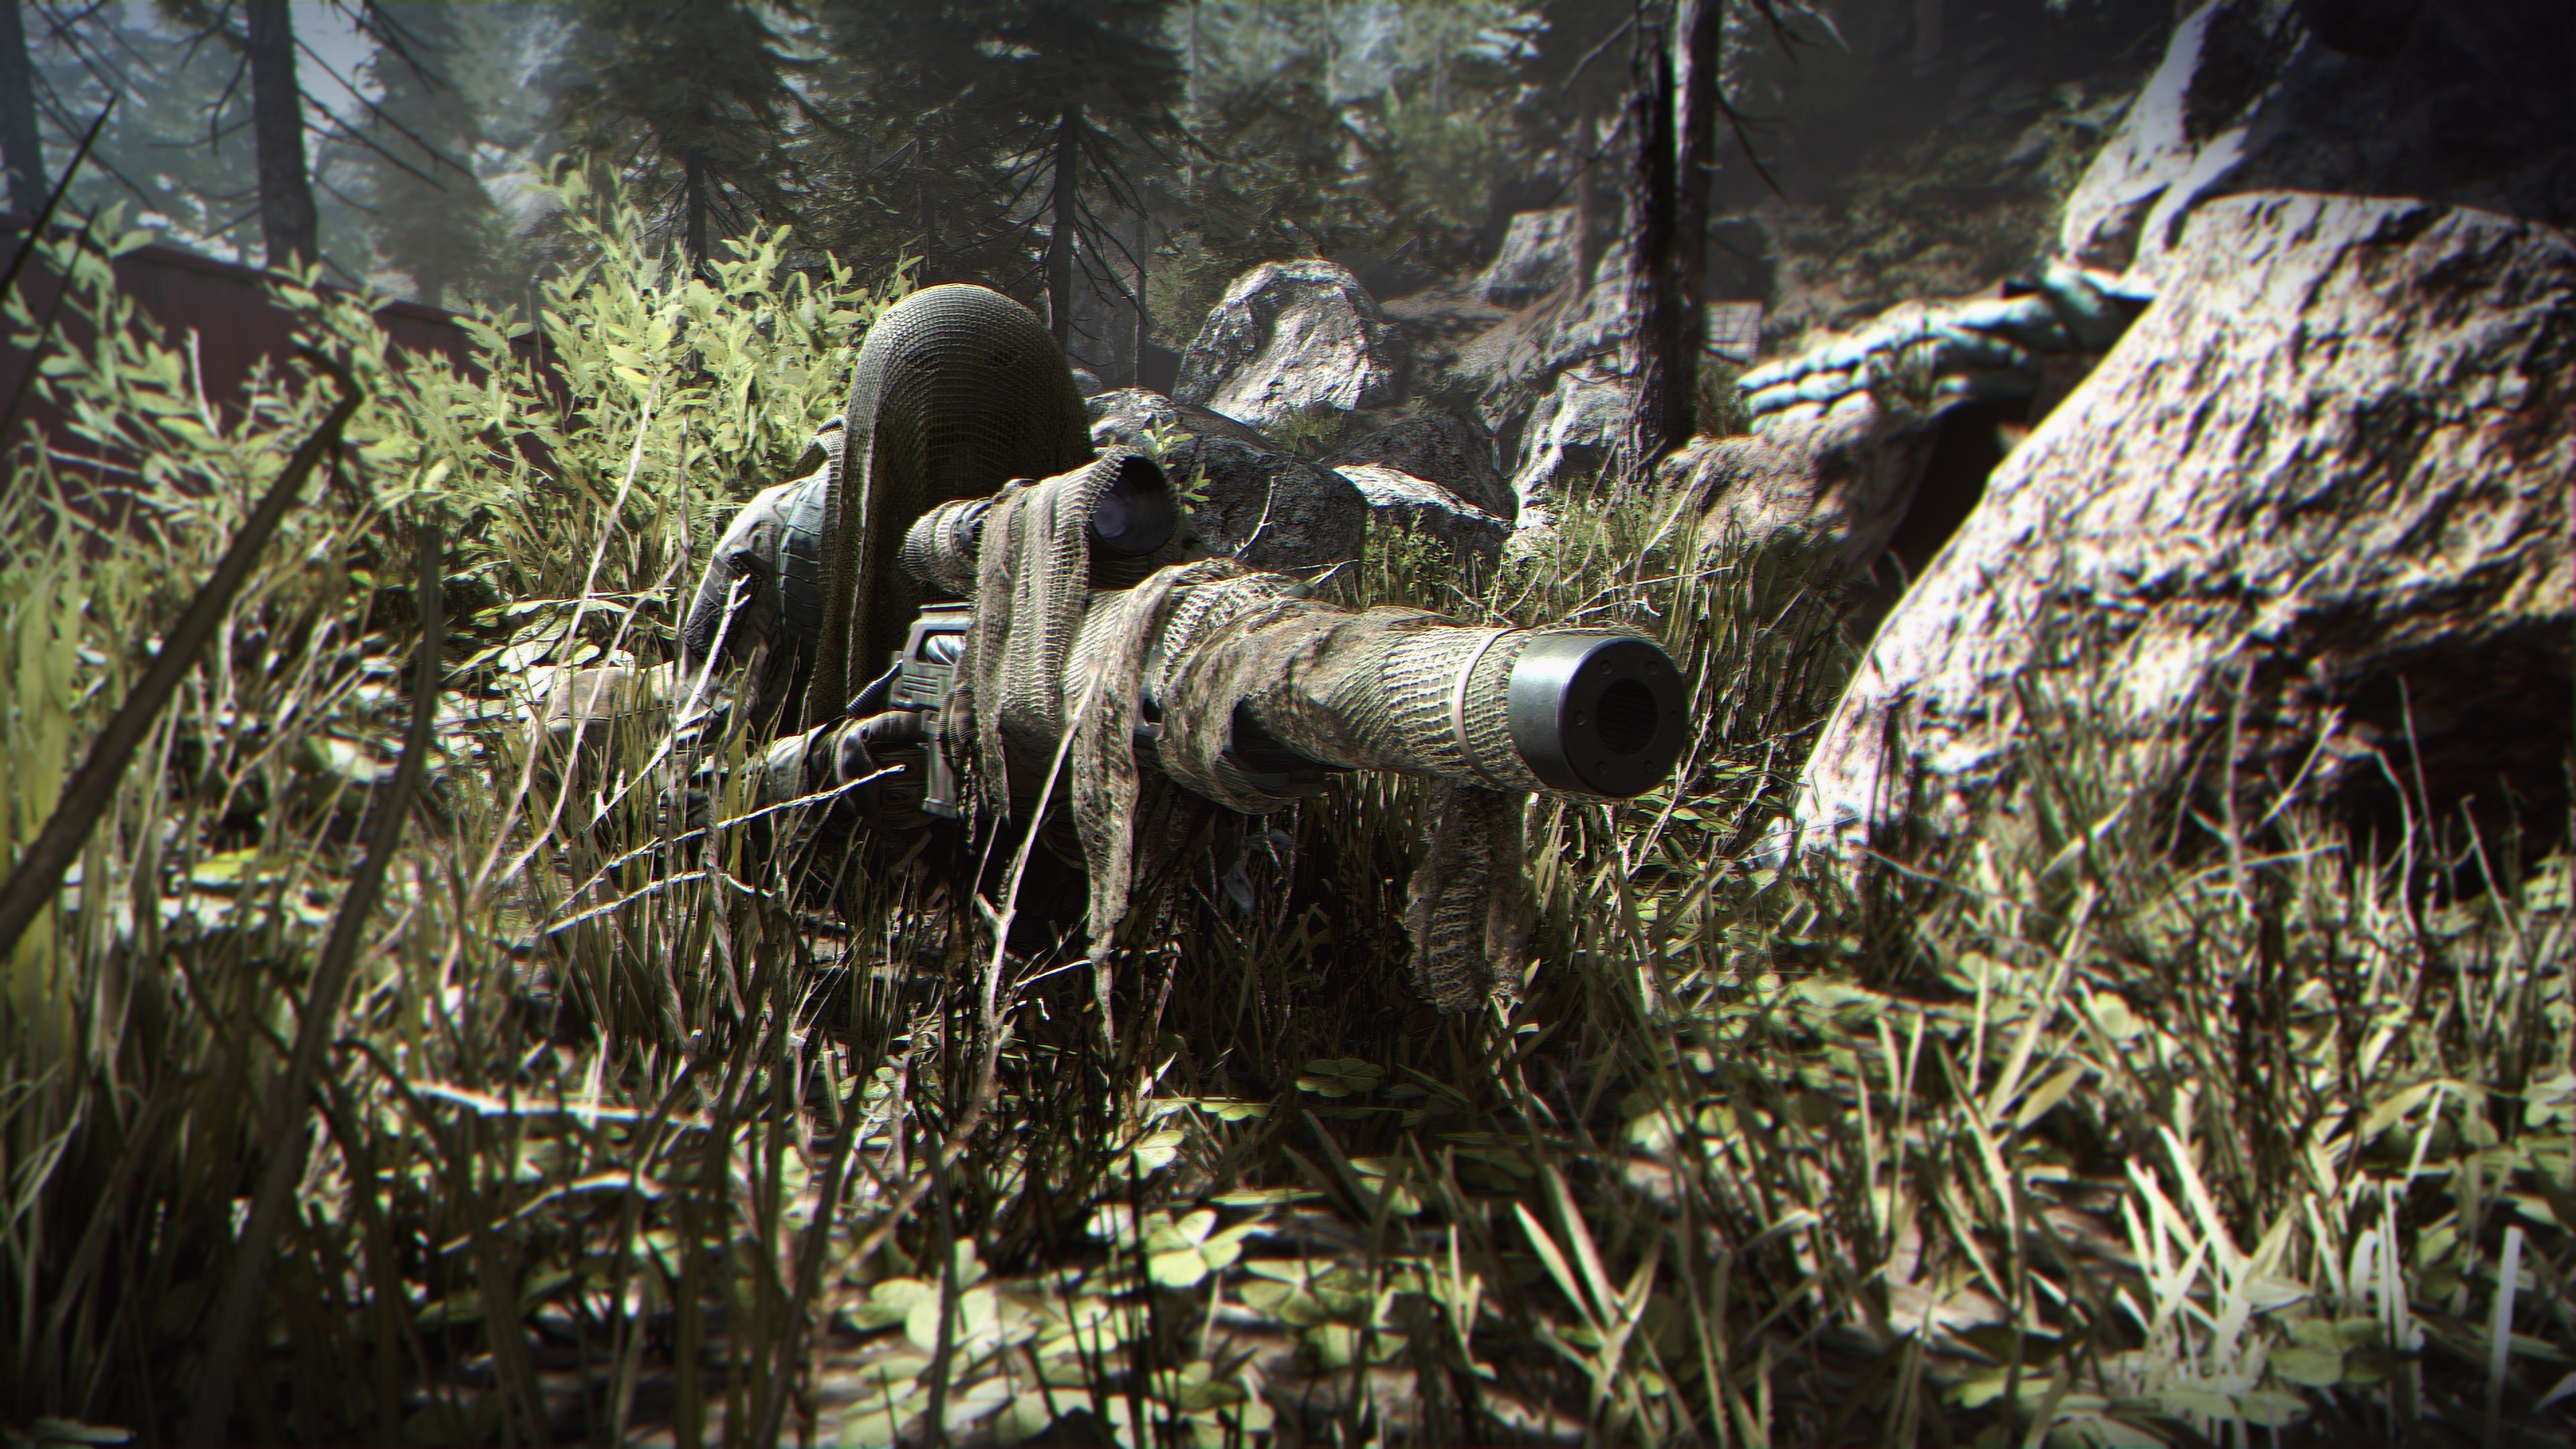 Call of Duty: Modern Warfare's multiplayer is the most played CoD